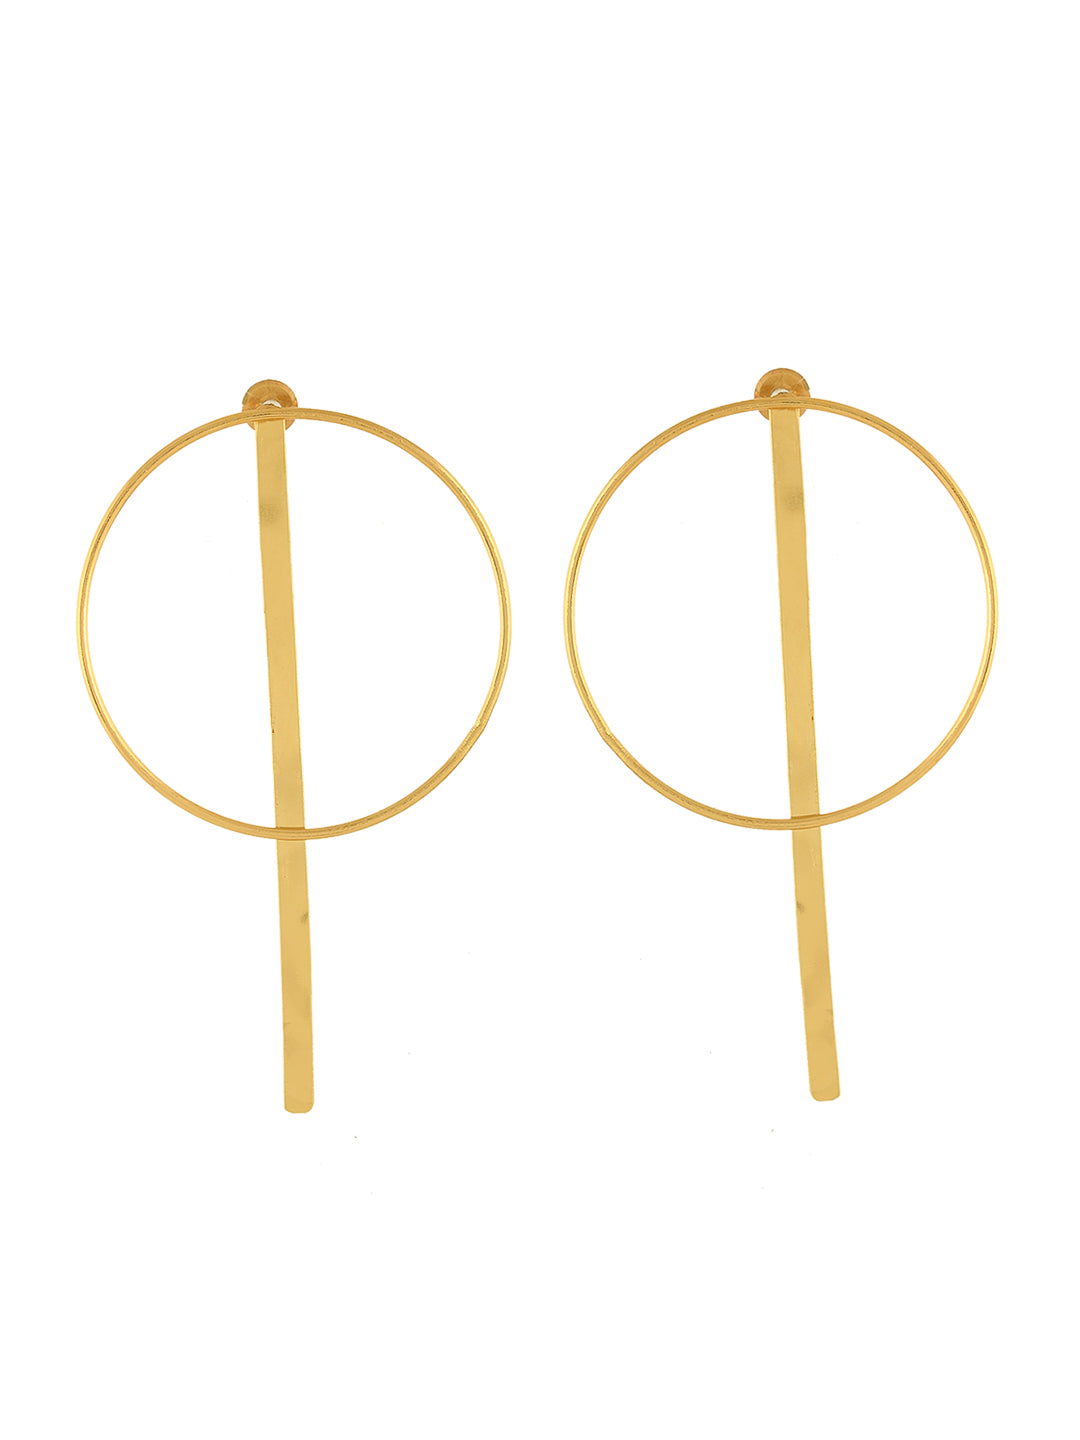 Contemporary Gold Plated Circle Of Life Earrings For Girls